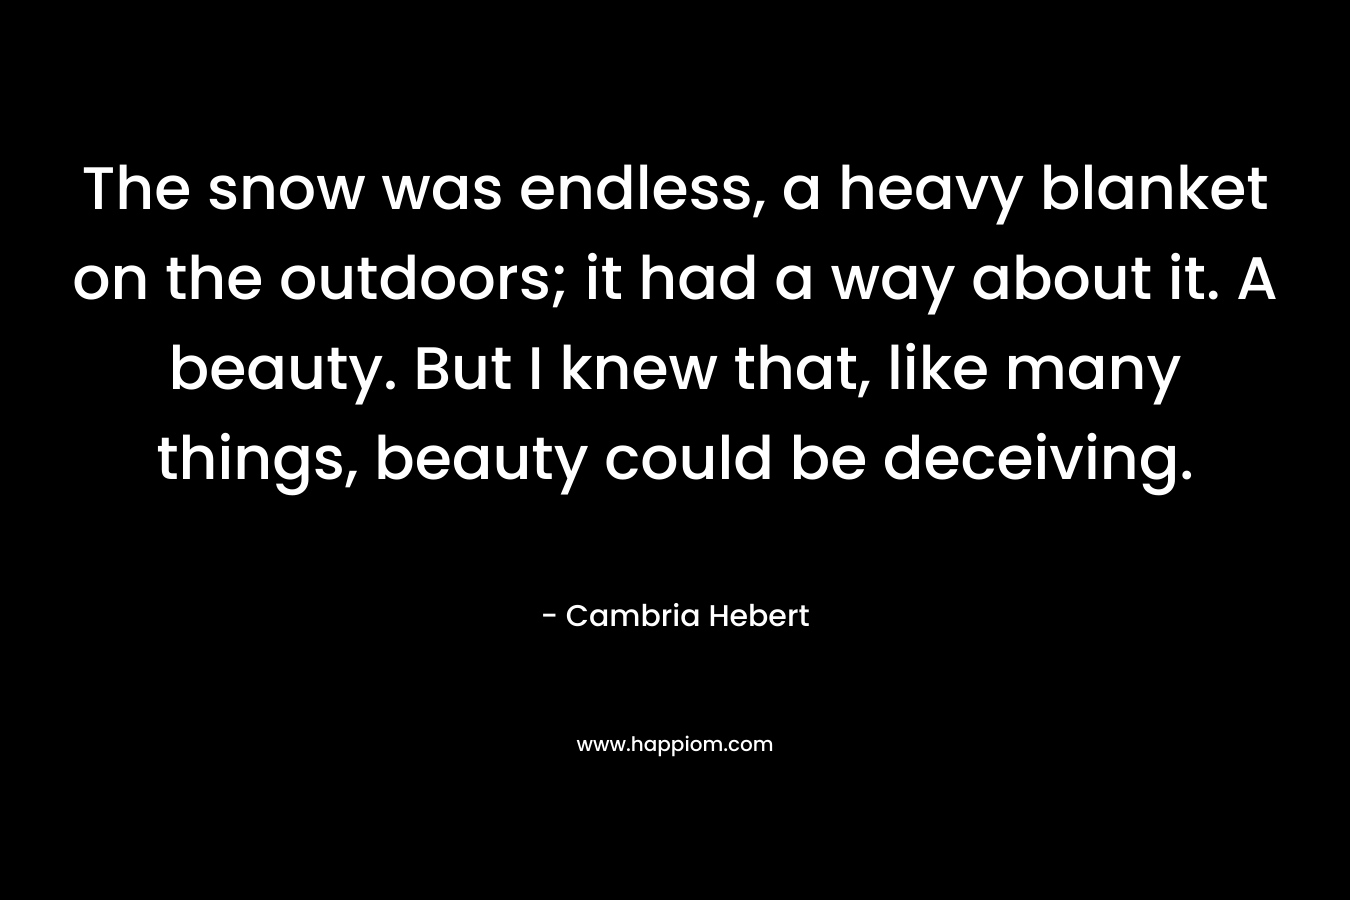 The snow was endless, a heavy blanket on the outdoors; it had a way about it. A beauty. But I knew that, like many things, beauty could be deceiving. – Cambria Hebert